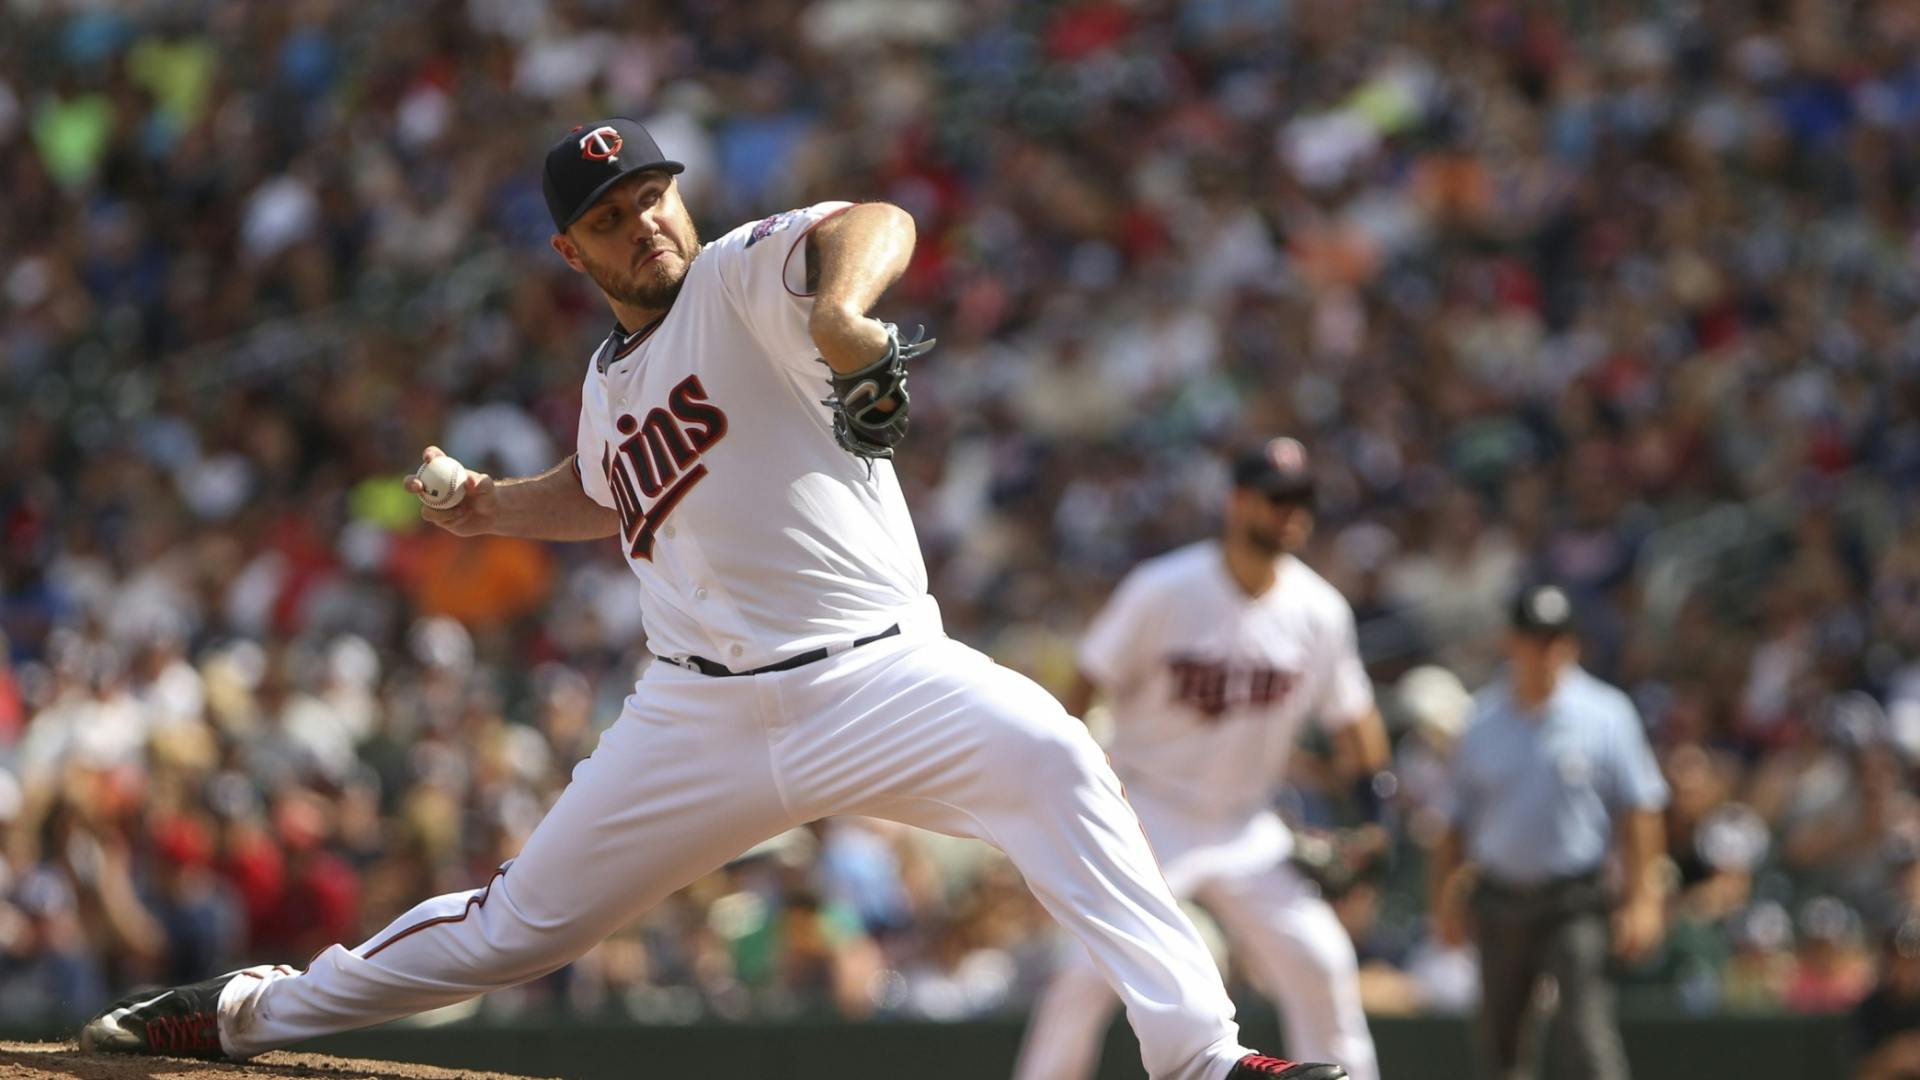 The Twins reliever walked the first two batters he faced on Sunday afternoon in his Minnesota debut.